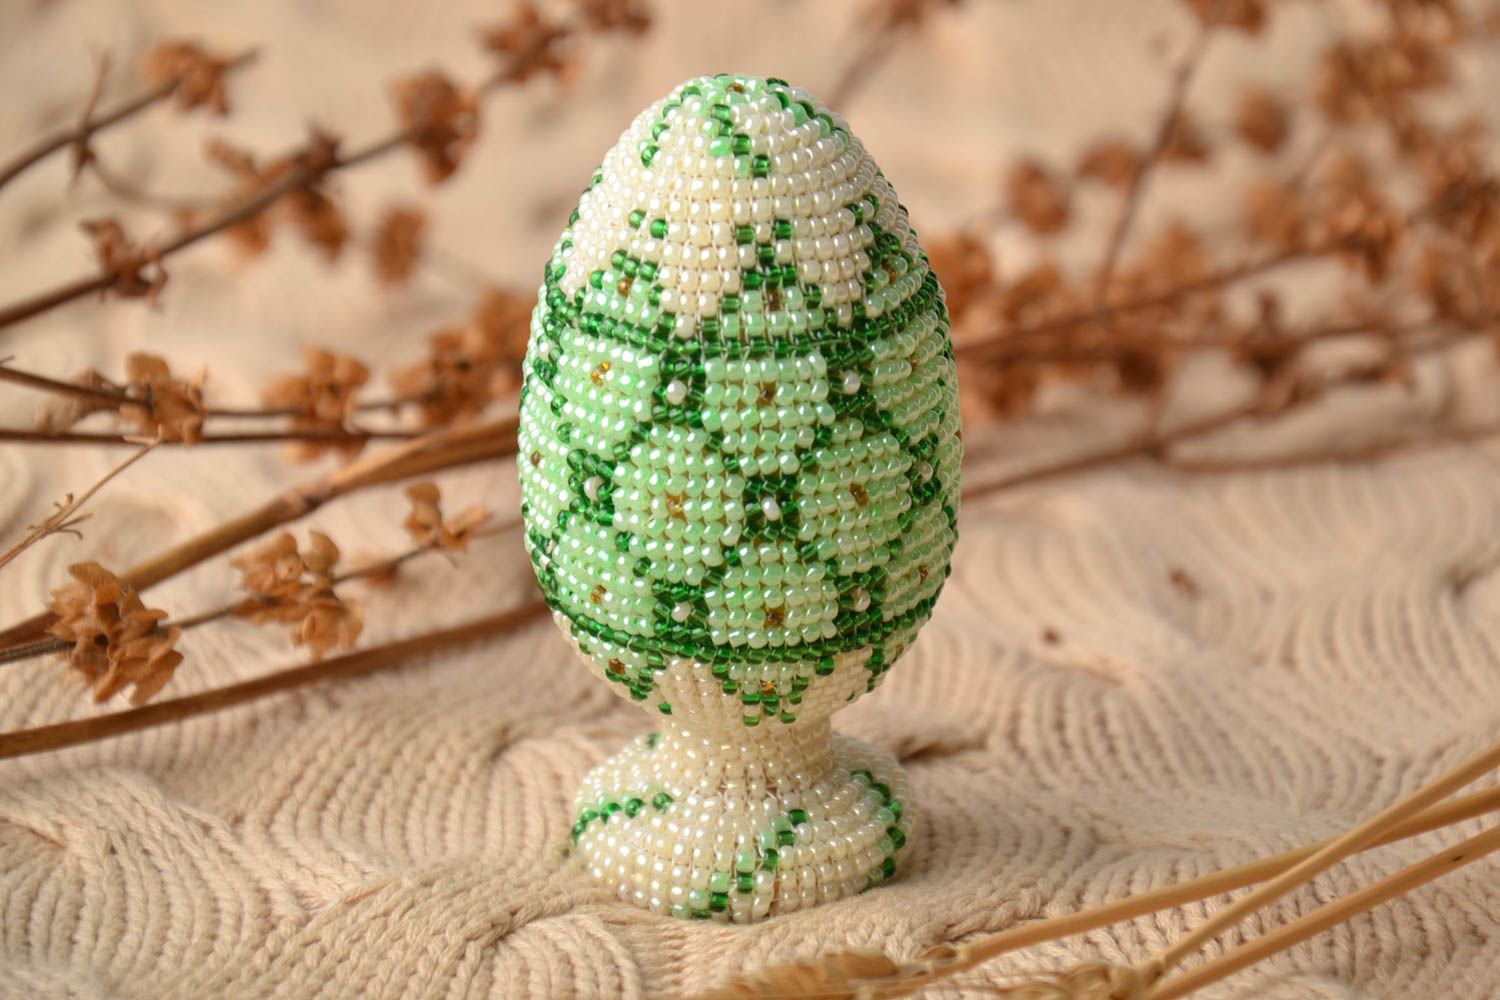 Wooden egg woven over with beads photo 1